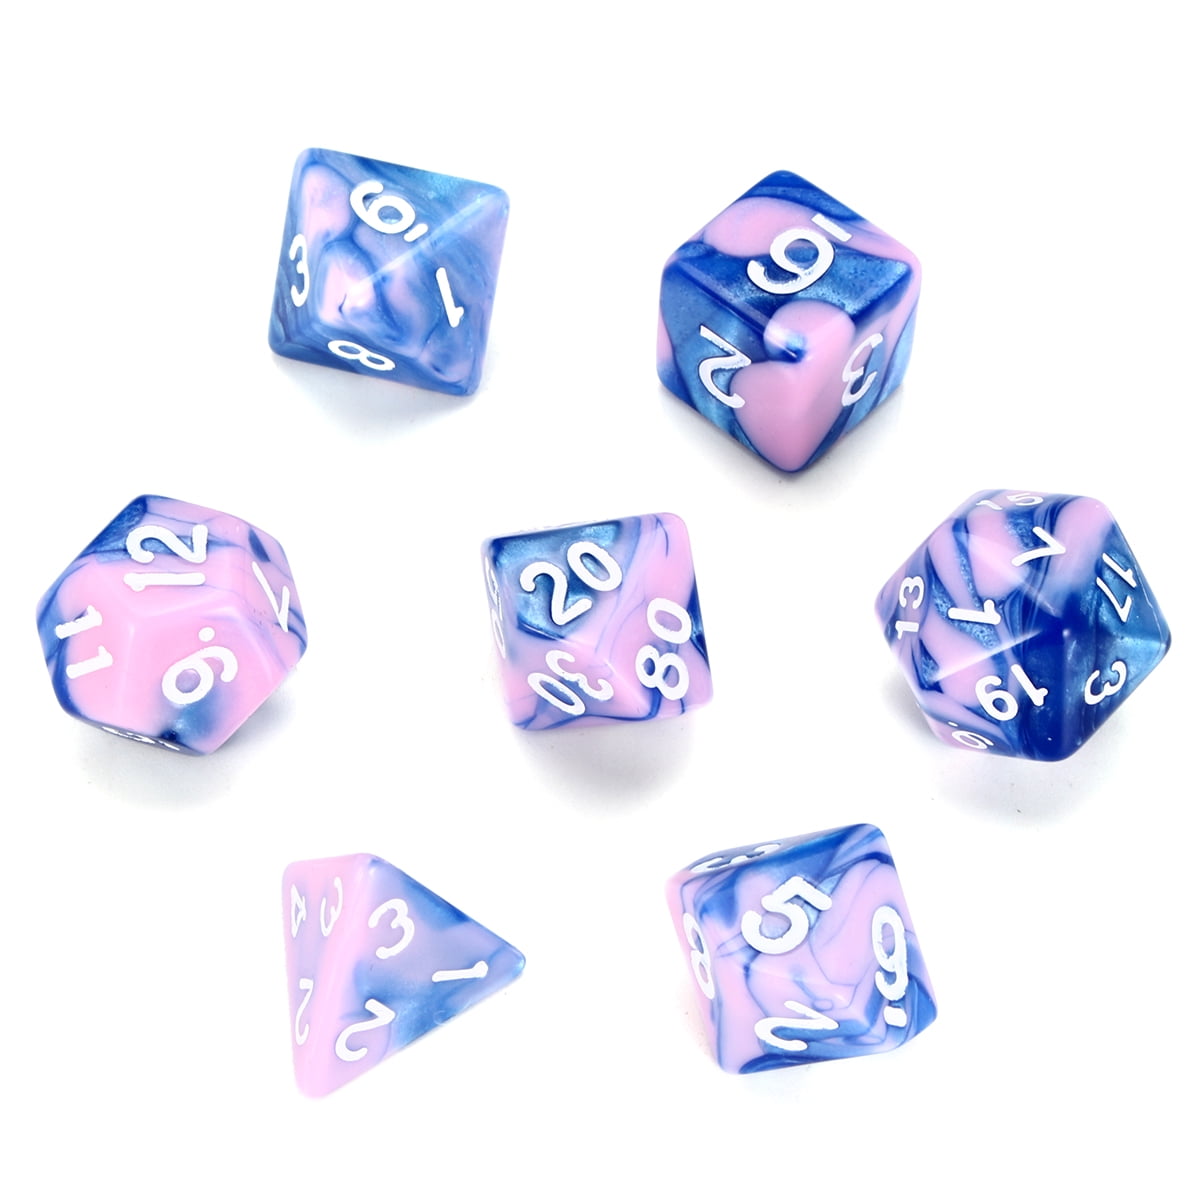 7Pcs Shiny Acrylic Polyhedral Dice DND RPG MTG Role Playing Game Bag 8